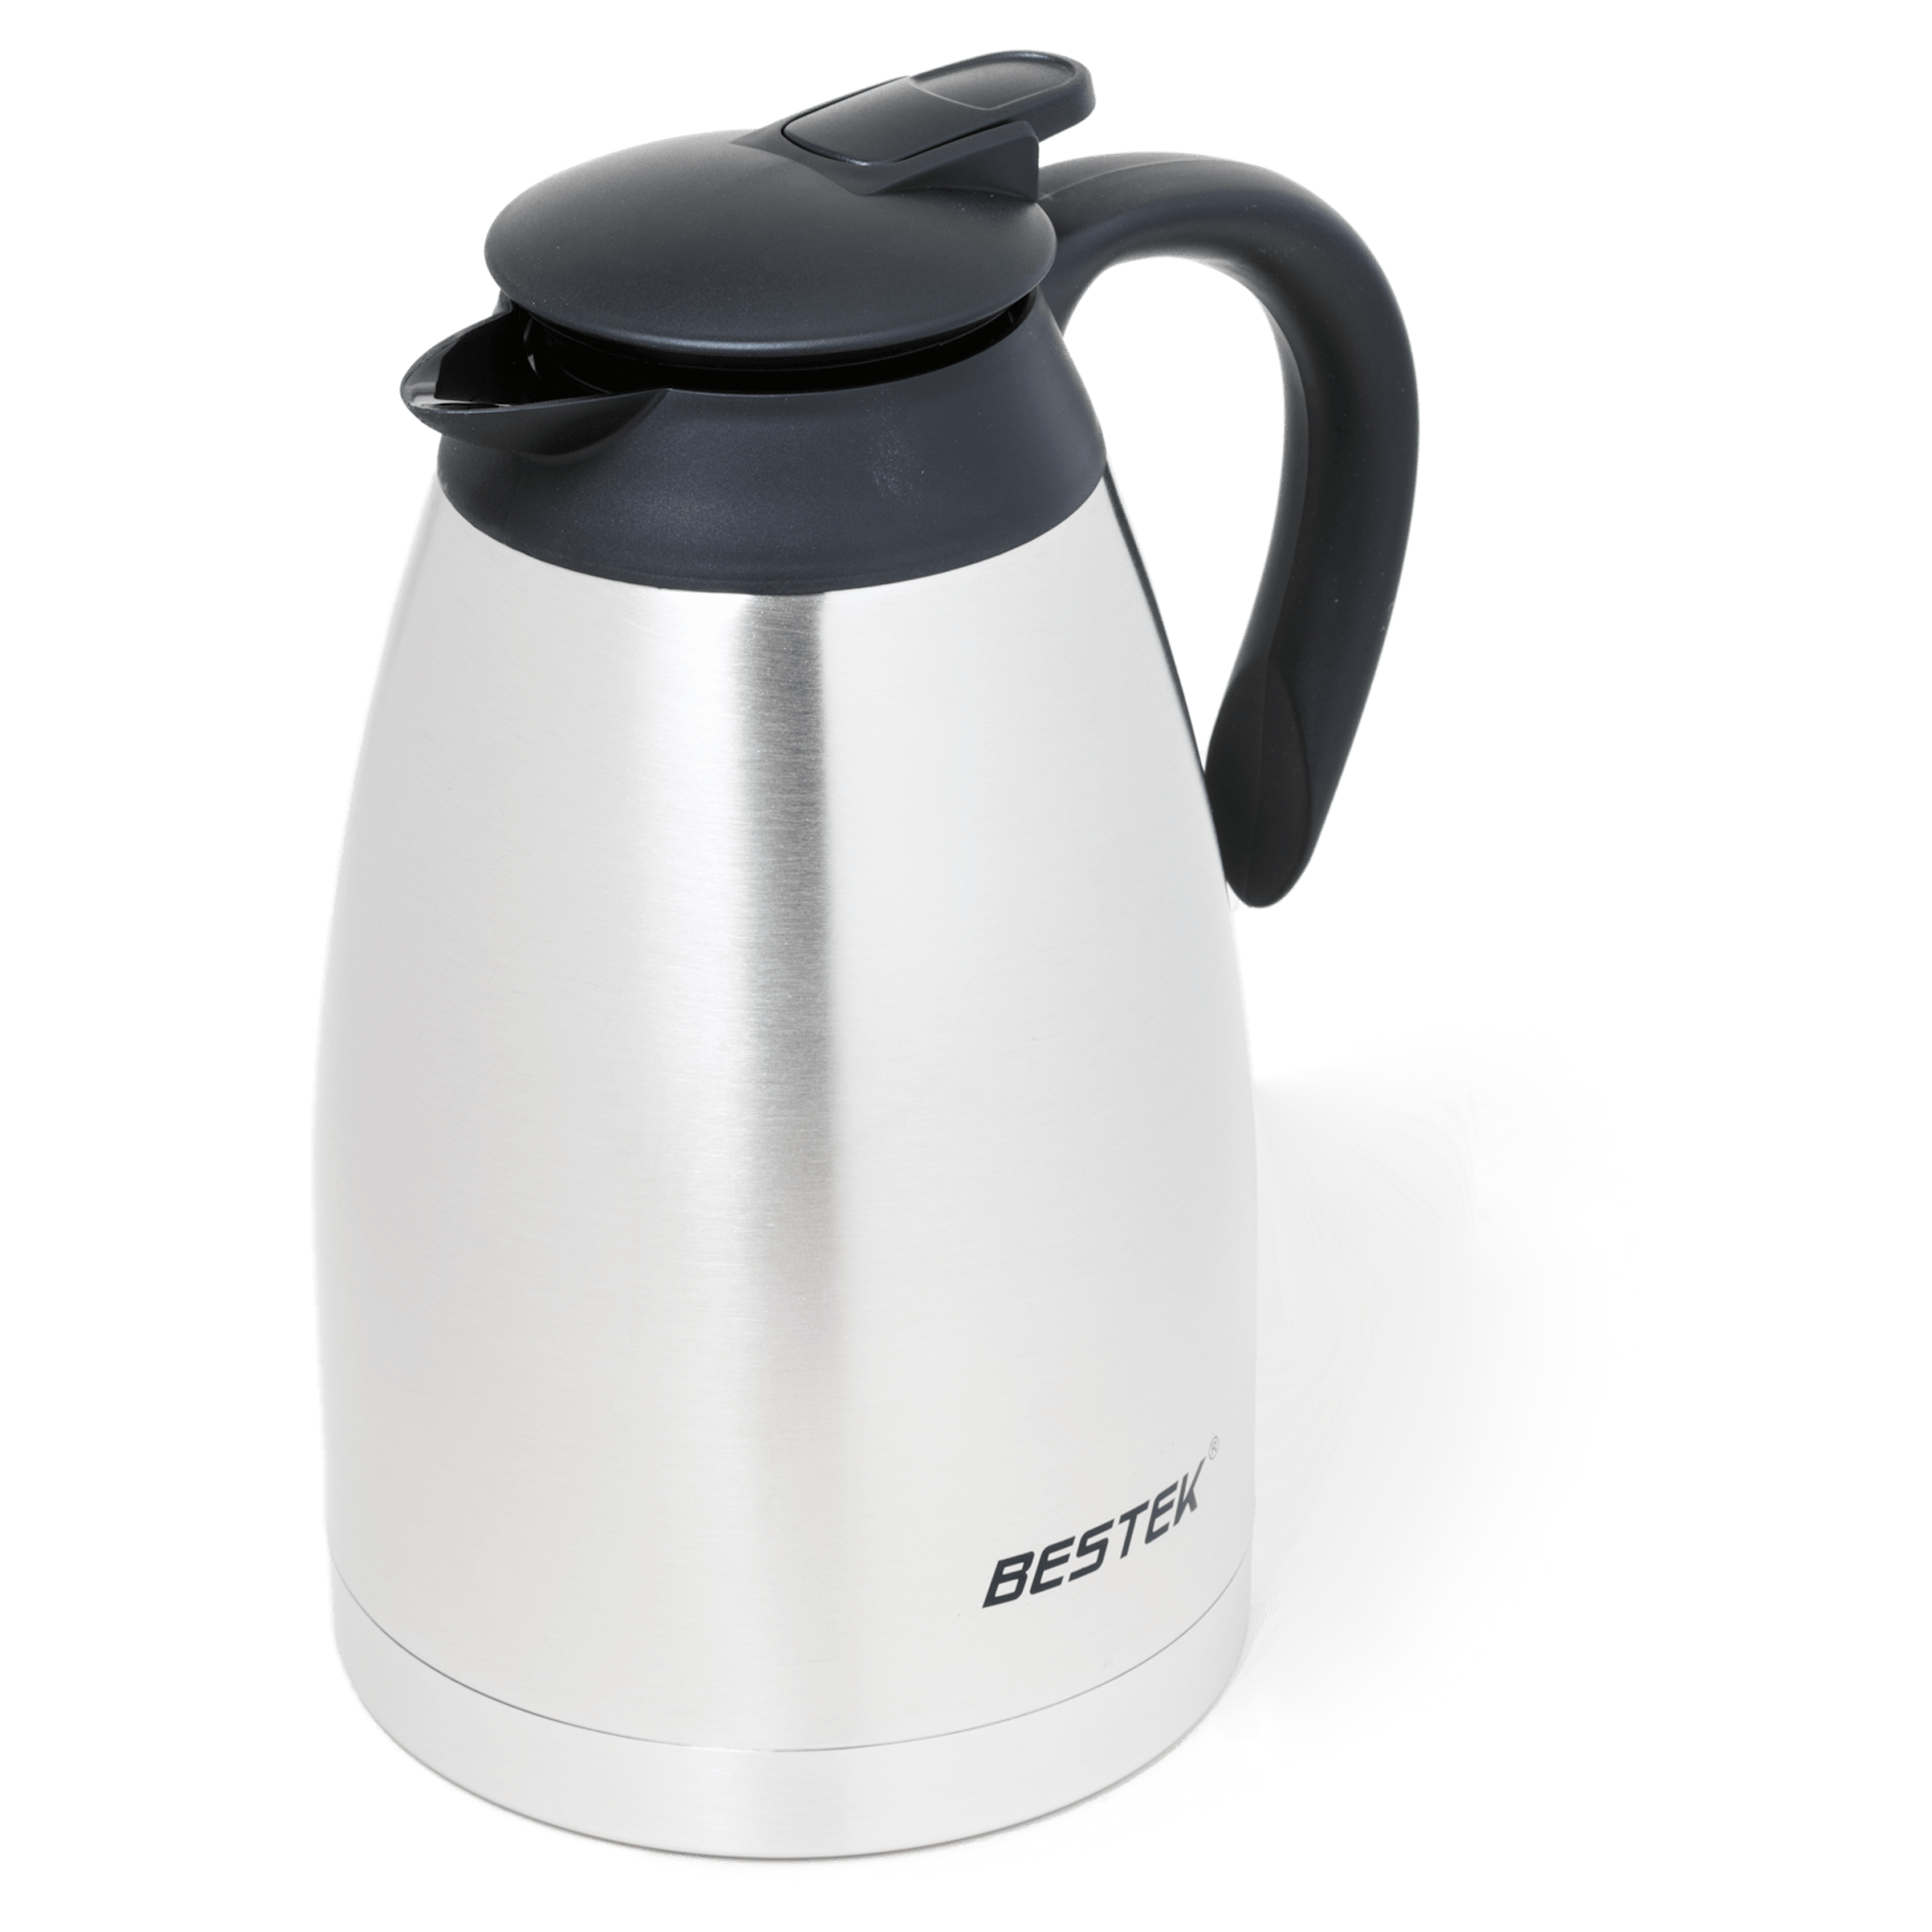 5 Best Thermal Carafe Coffee Makers ☕️ : Expert Reviews, Pros & Cons, and  Buying Guide